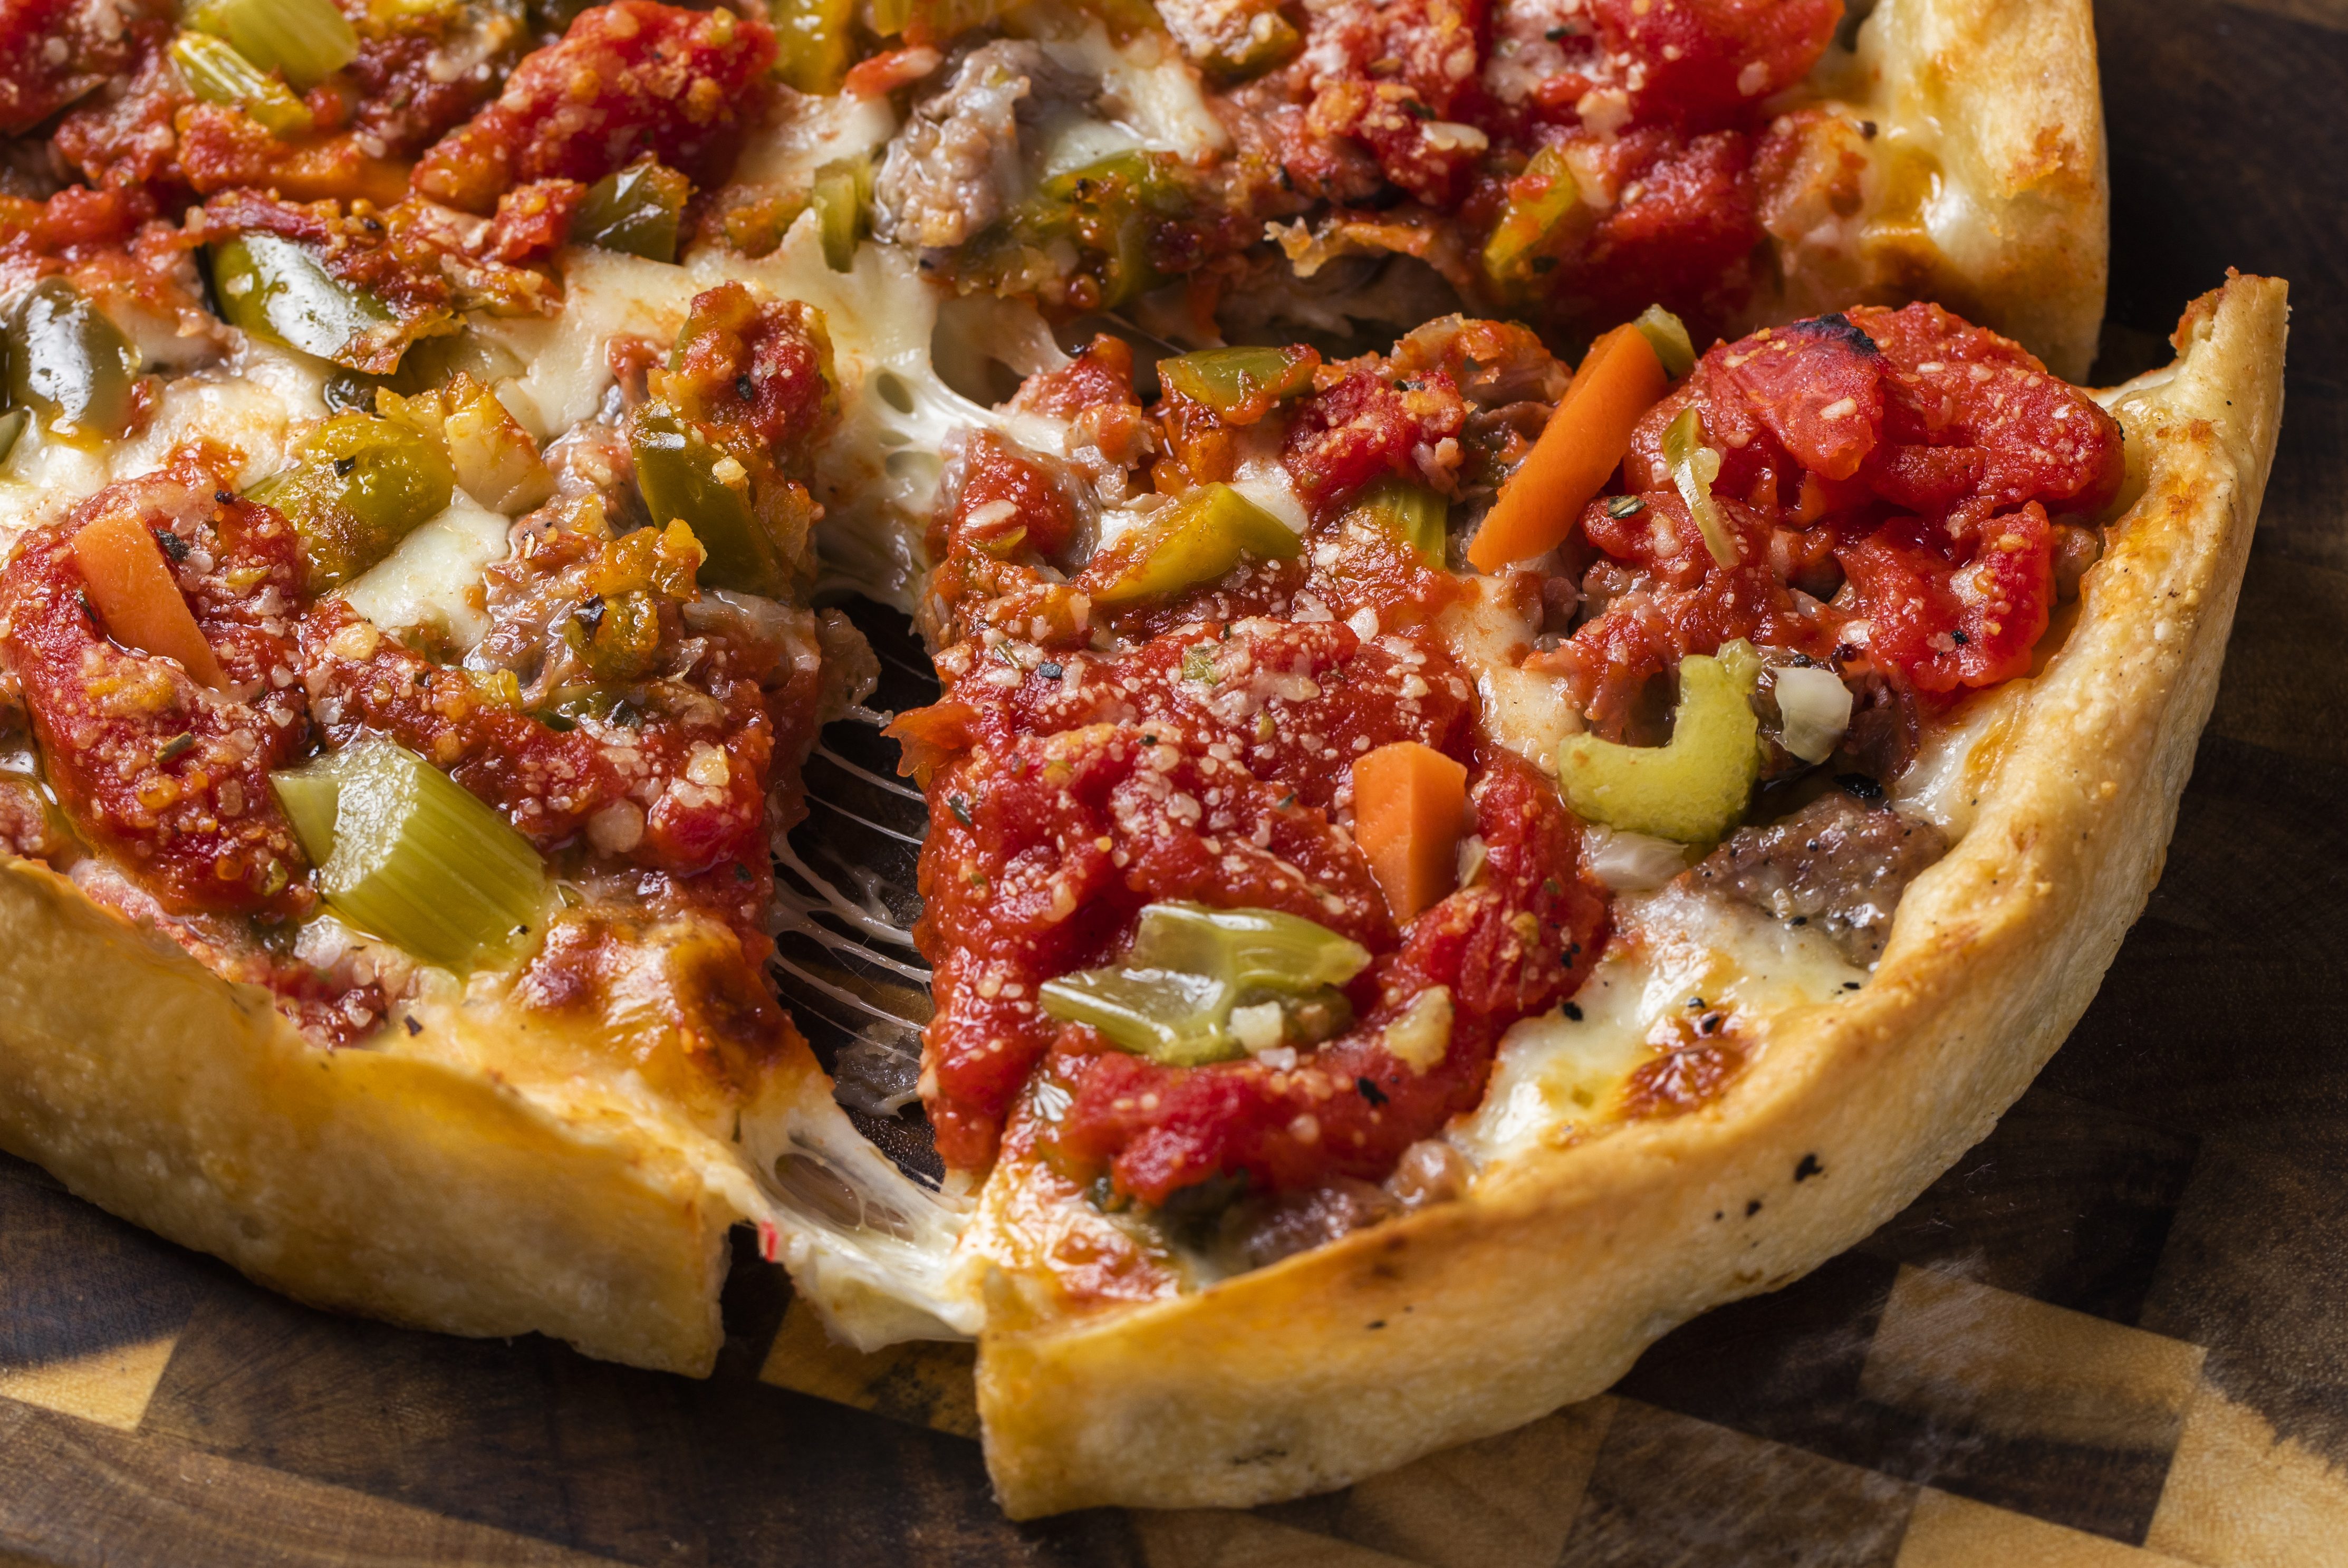 Lou Malnati's is launching an Italian beef and hot giardiniera pizza for National Pizza Month